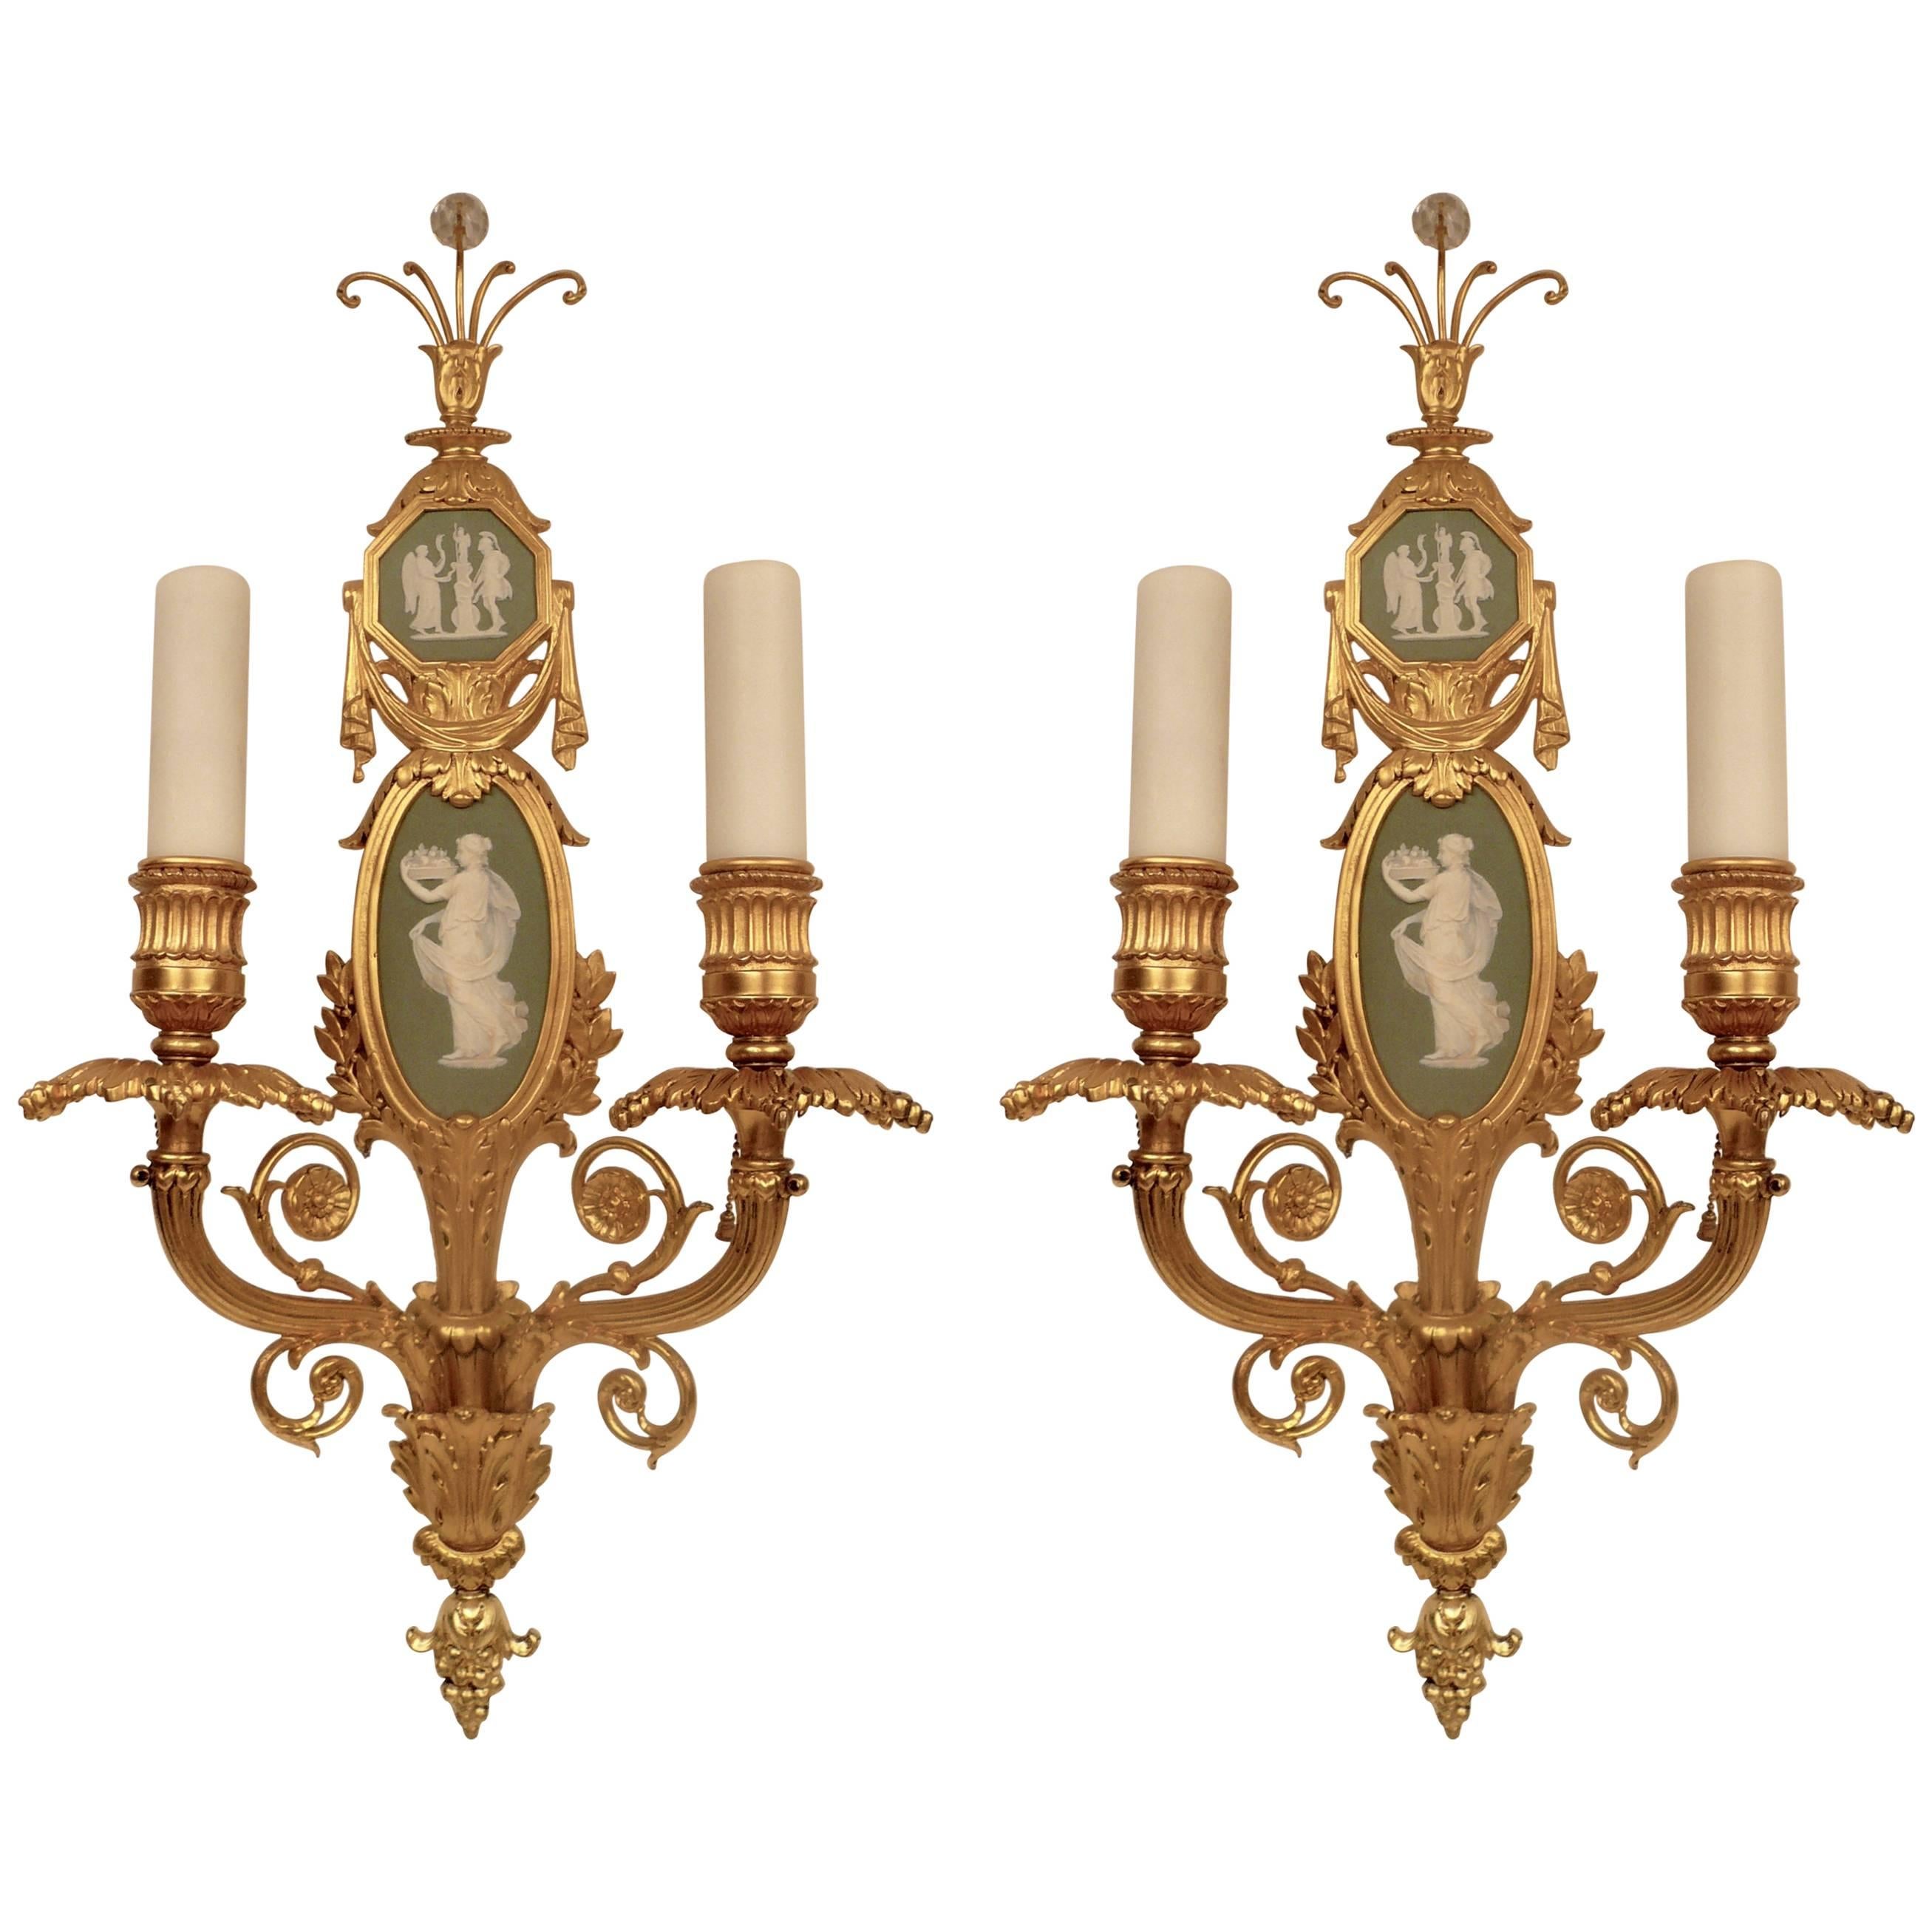 Pair of Gilt Bronze and Wedgwood Neo-Classical Style Sconces